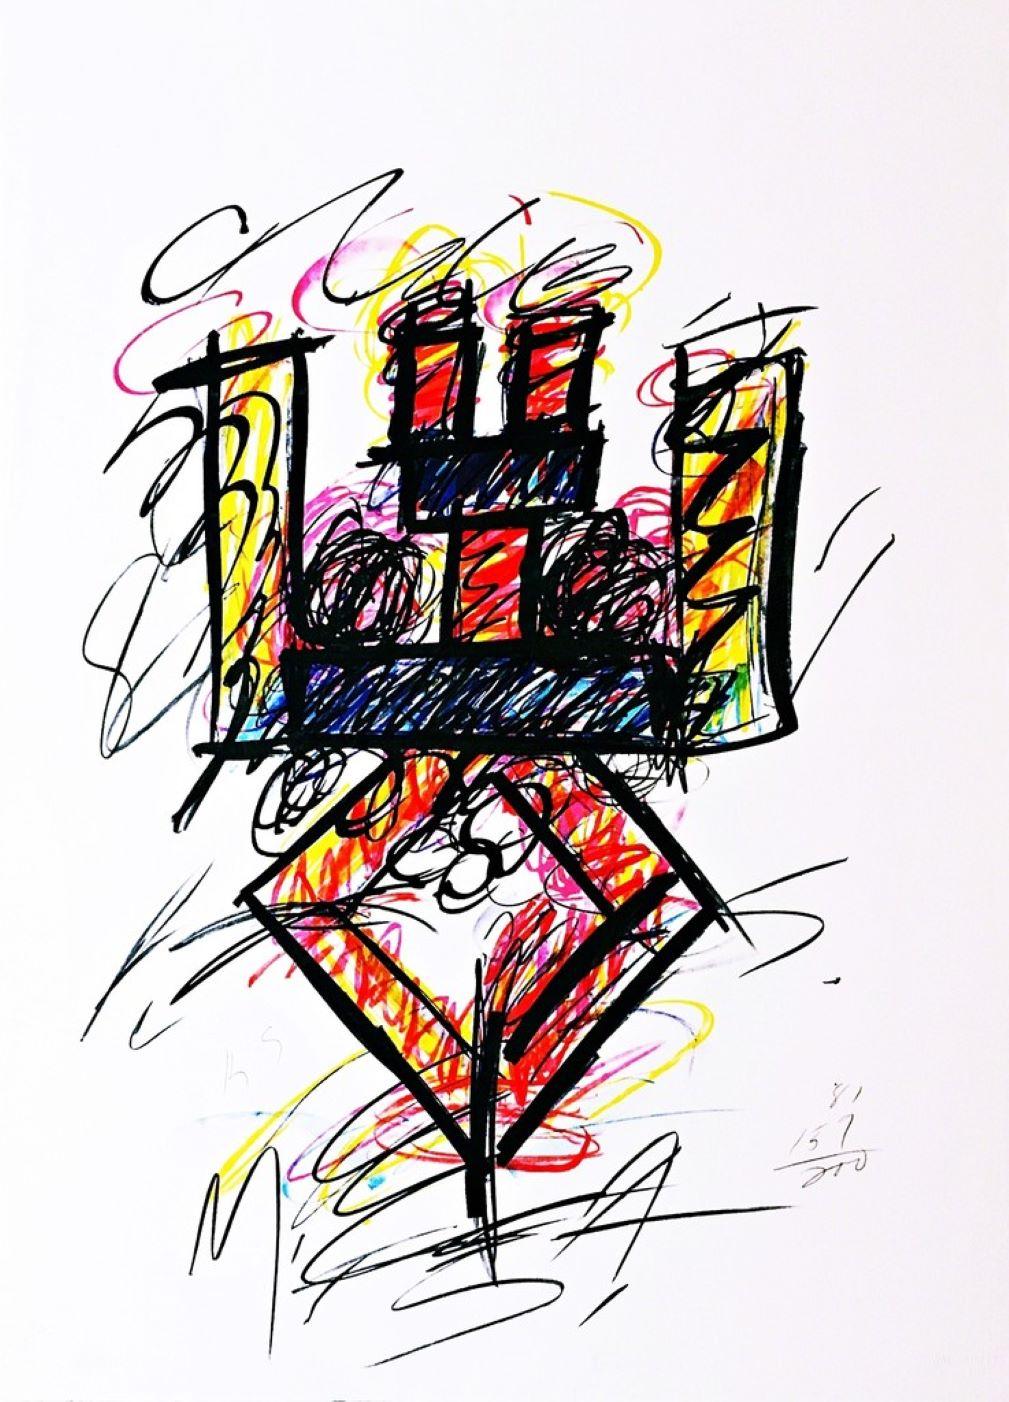 Untitled sculptural lithograph (signed/numbered) by renowned sculptor - Print by Keith Sonnier